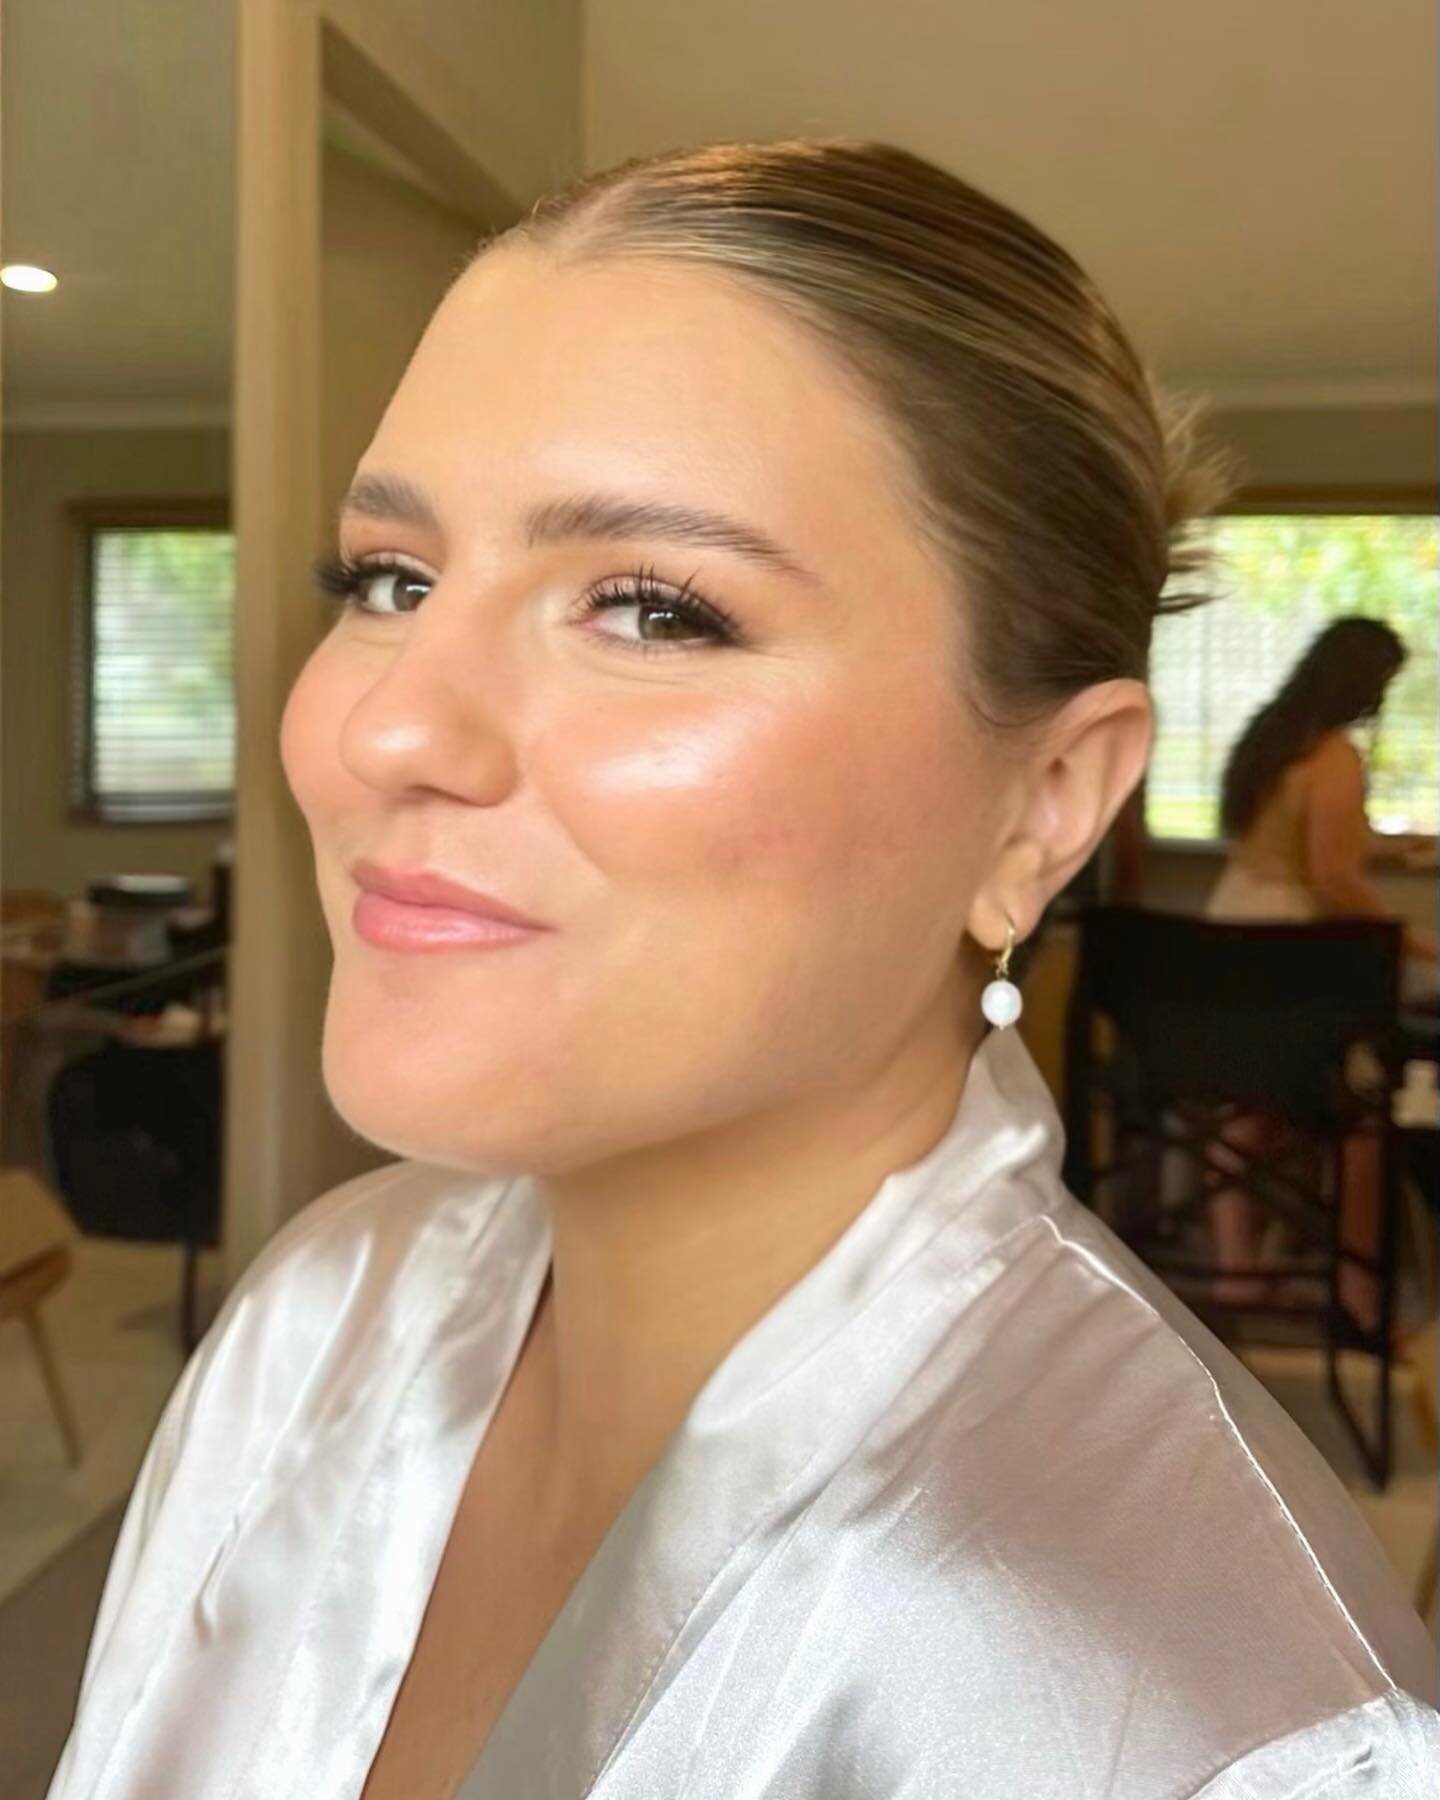 Team bride glow up ✨
Uncomplicated, perfected glam. 
Perfection for a hinterland wedding 🌱
.
.
.
#byronbaymakeupartist #goldcoastmakeupartist #byronbay #byronbaywedding #weddingmakeup #byronbaybeauty #beauty #skin #bridalmakeup #goldcoastmua #bridal